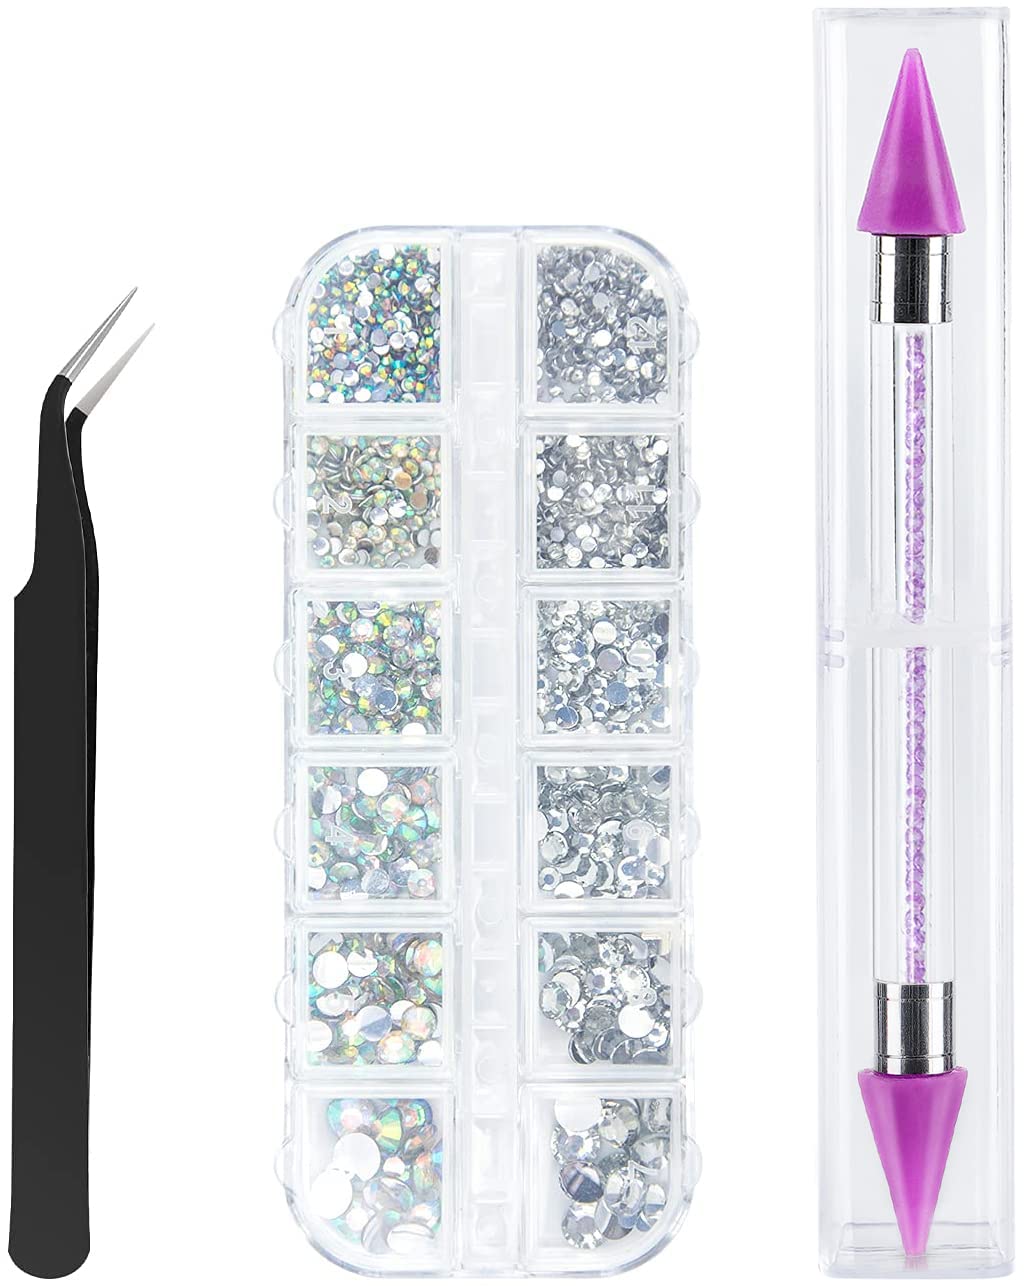 Canvalite 1500PCS Rhinestones in 6 Sizes Flat Back Gems, Crystal AB Rhinestones  Nail Art Gems with Pick Up Tweezers and Rhinestone Picker Dotting Pen, Nail  Art Tools for Nails, Clothes, Face, Craft